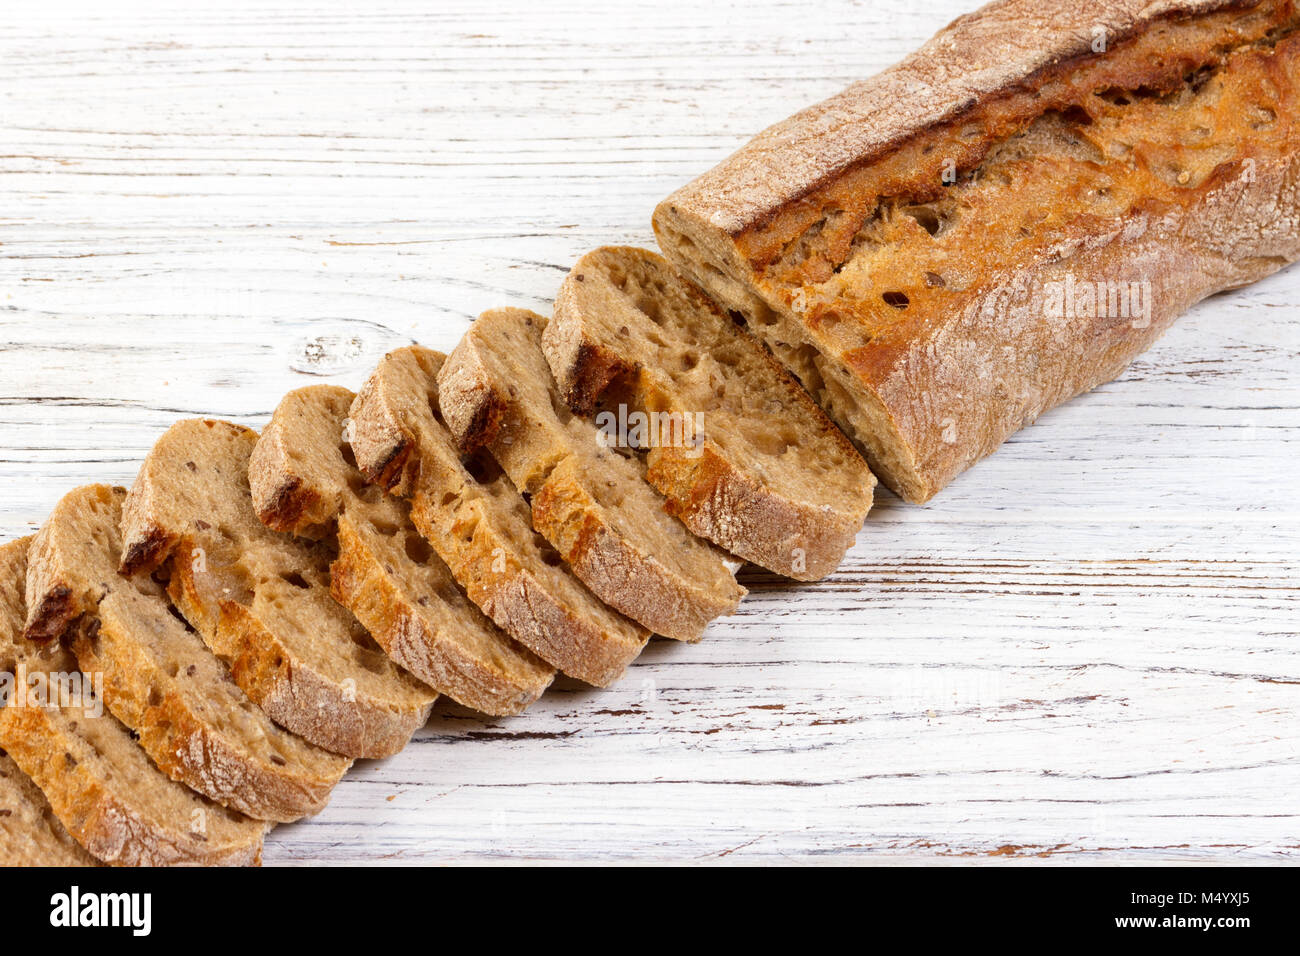 French bread, Baguette sliced on chopping board. Stock Photo